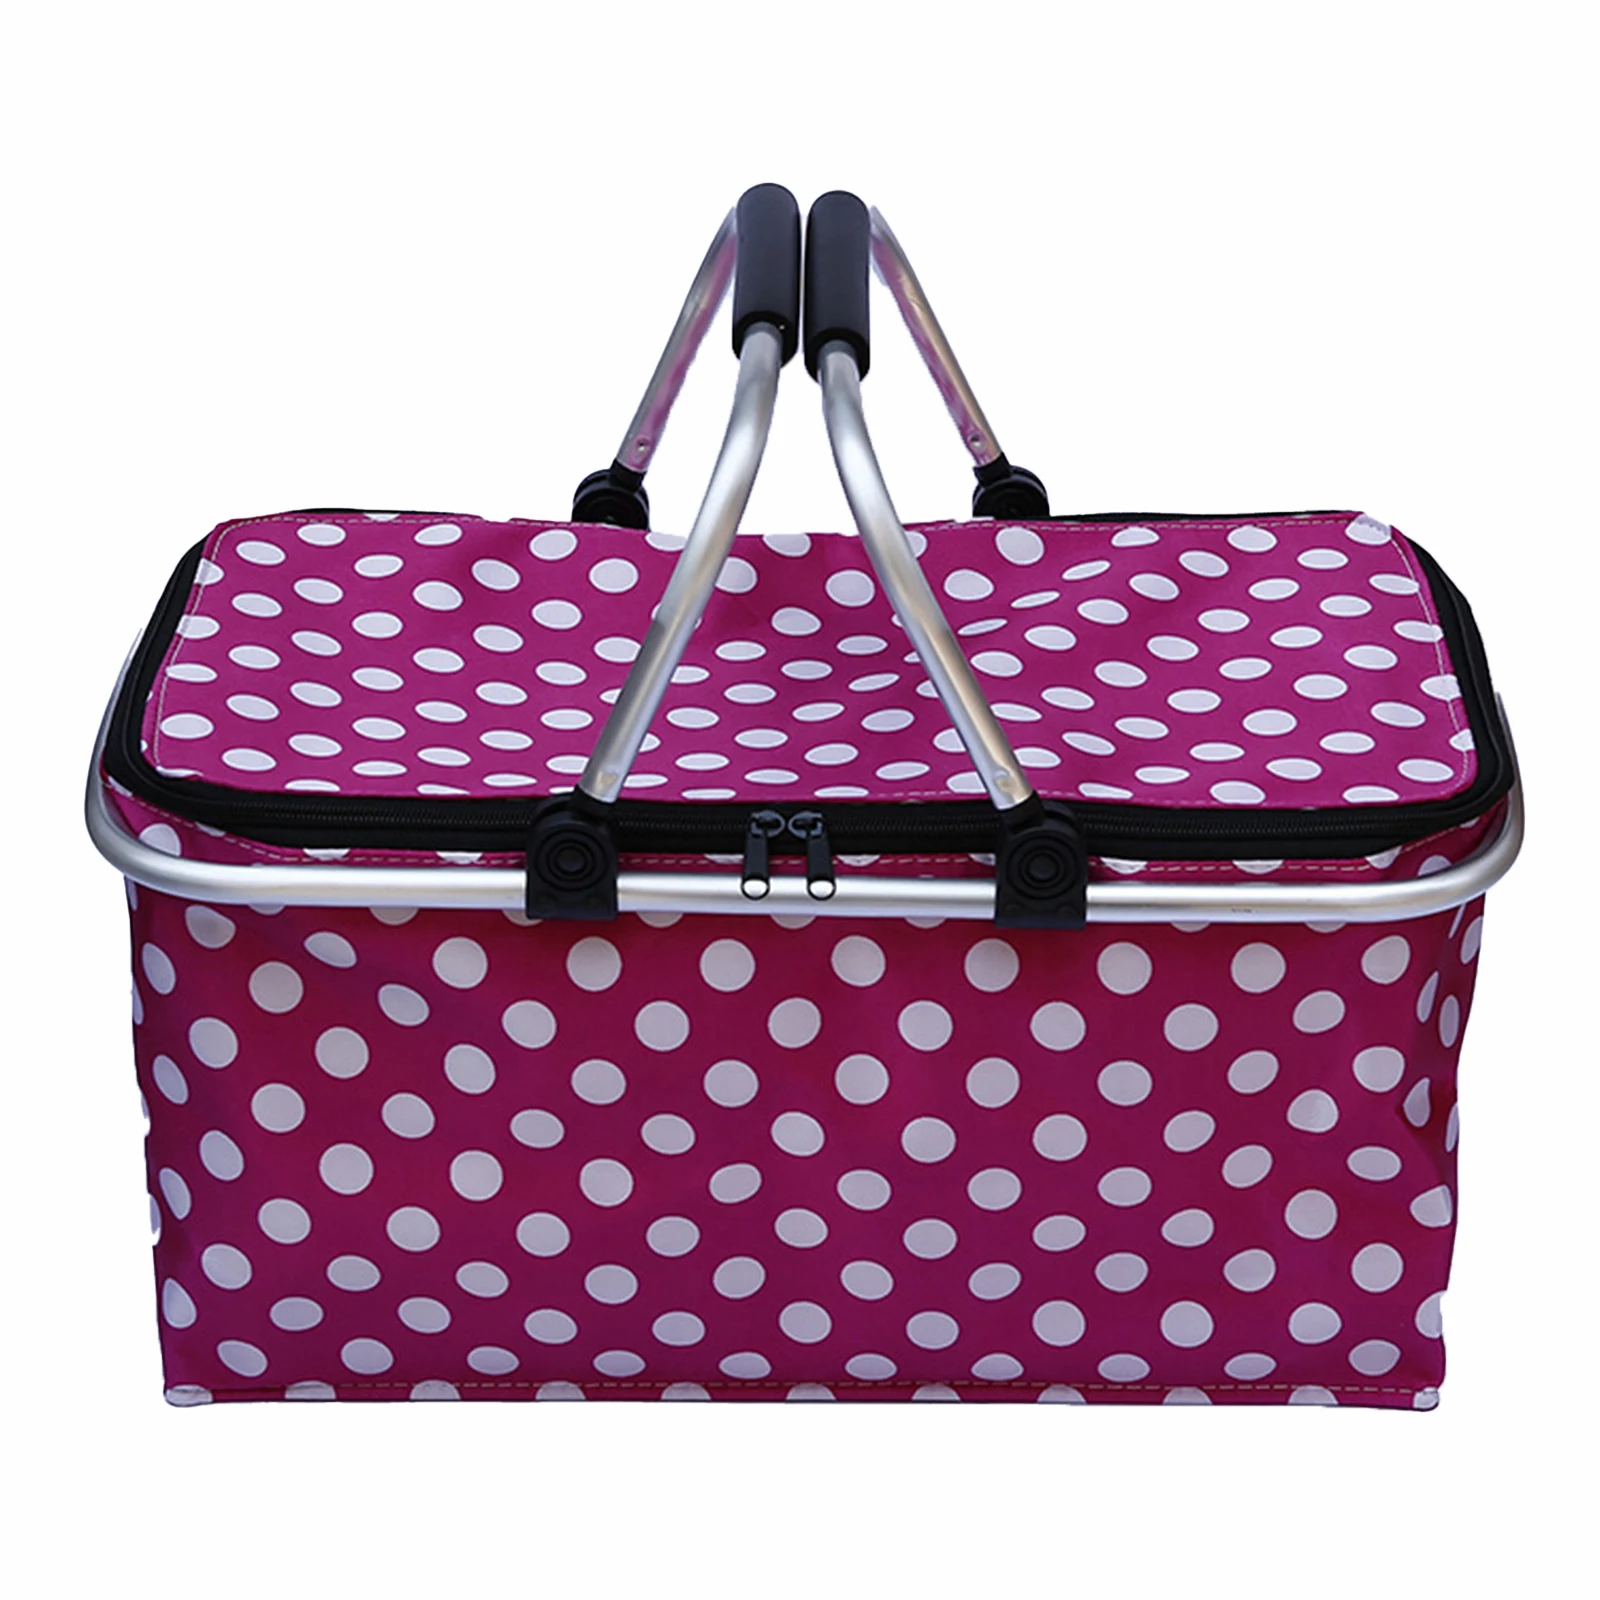 

Portable Double Handle With Zipper 8 Gallon Carrying Bag Grocery Shopping Basket With Handles For Travel Beach Camping